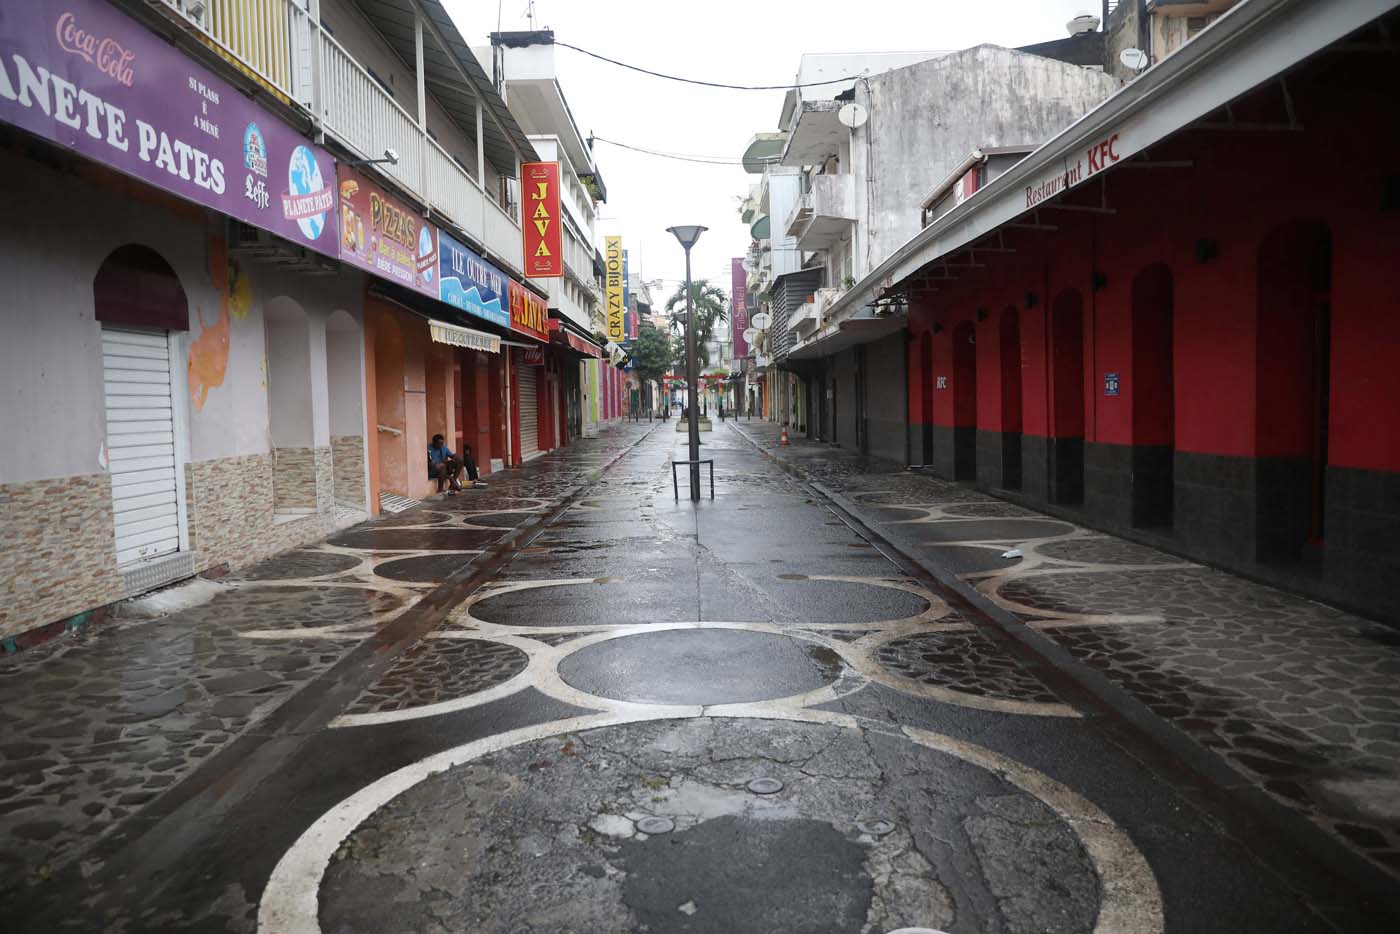 People sit on the side of an empty street as Hurricane Maria approaches in Pointe-a-Pitre, Guadeloupe island, France, September 18, 2017. REUTERS/Andres Martinez Casares